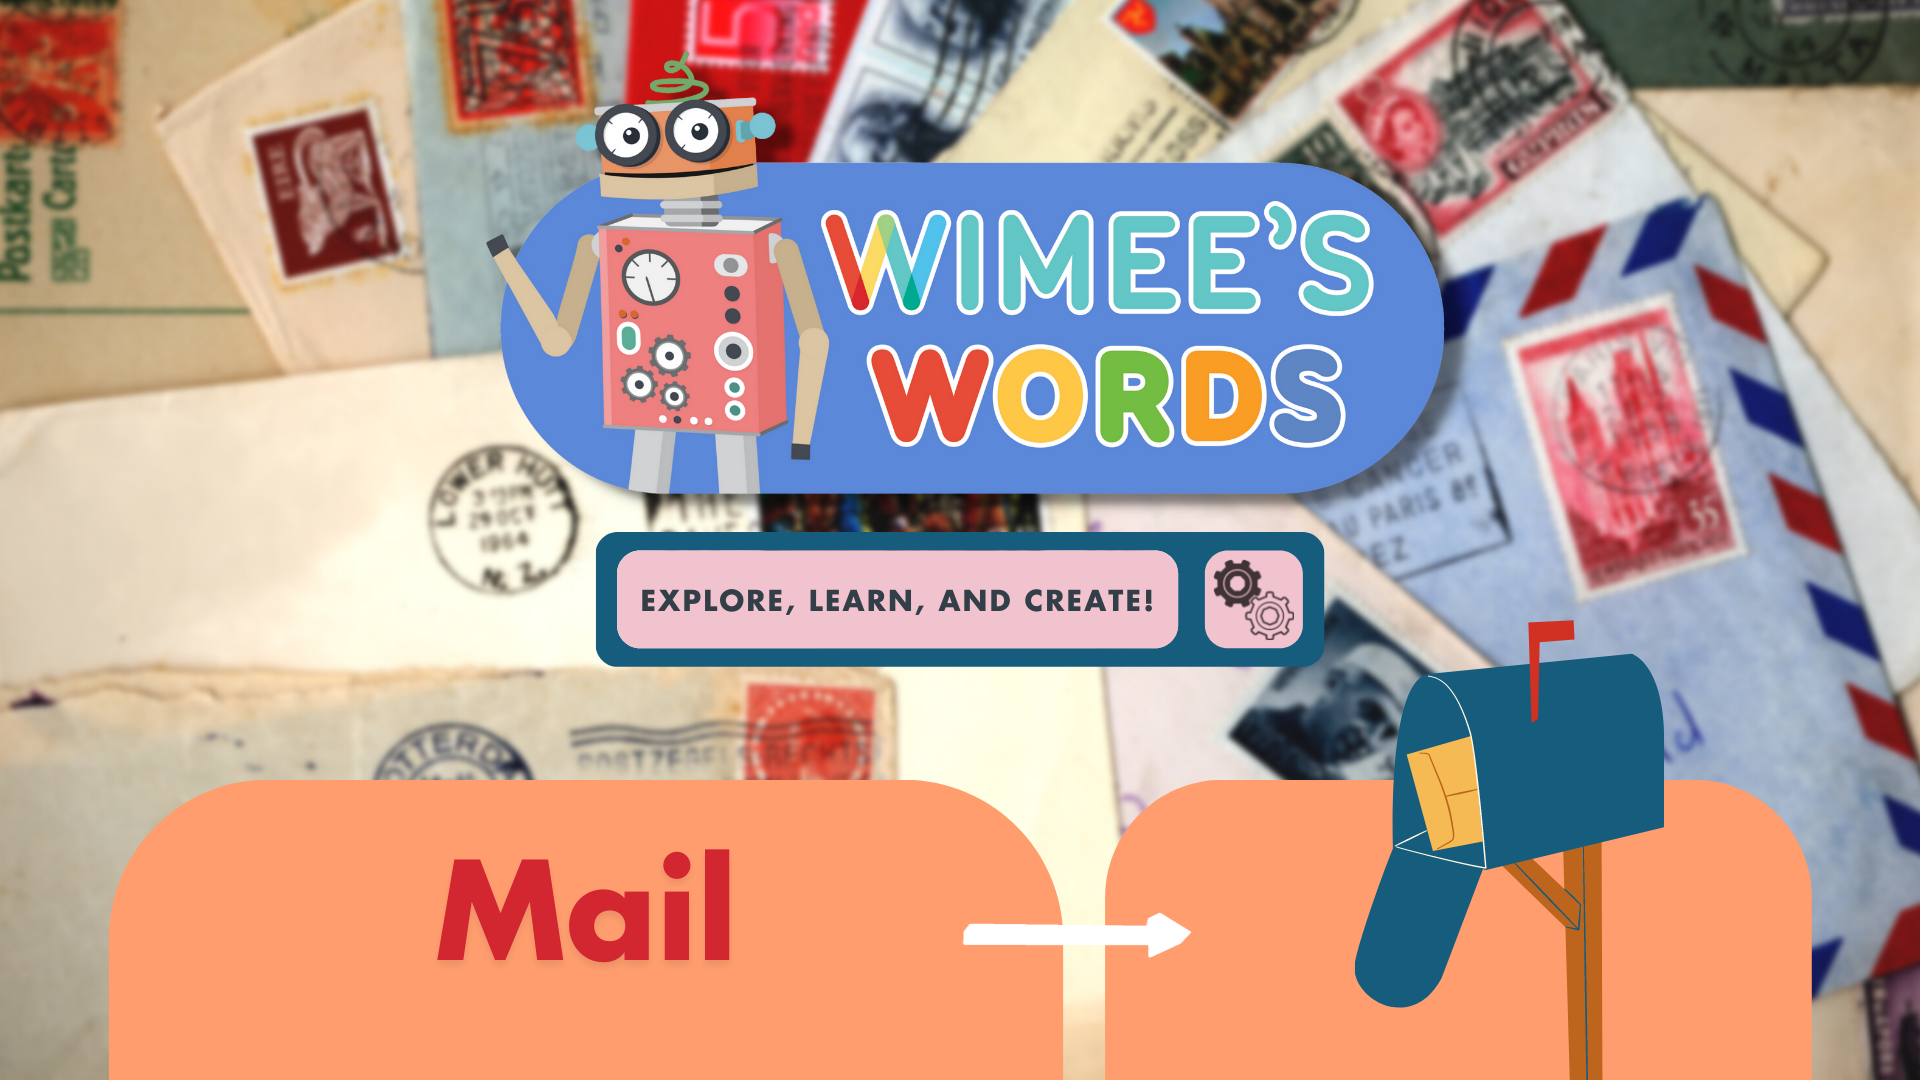 An out of focus photo og a spread of letters. The Wimee's Words logo, the title "Mail," and a graphic of a mailbox are over the image.